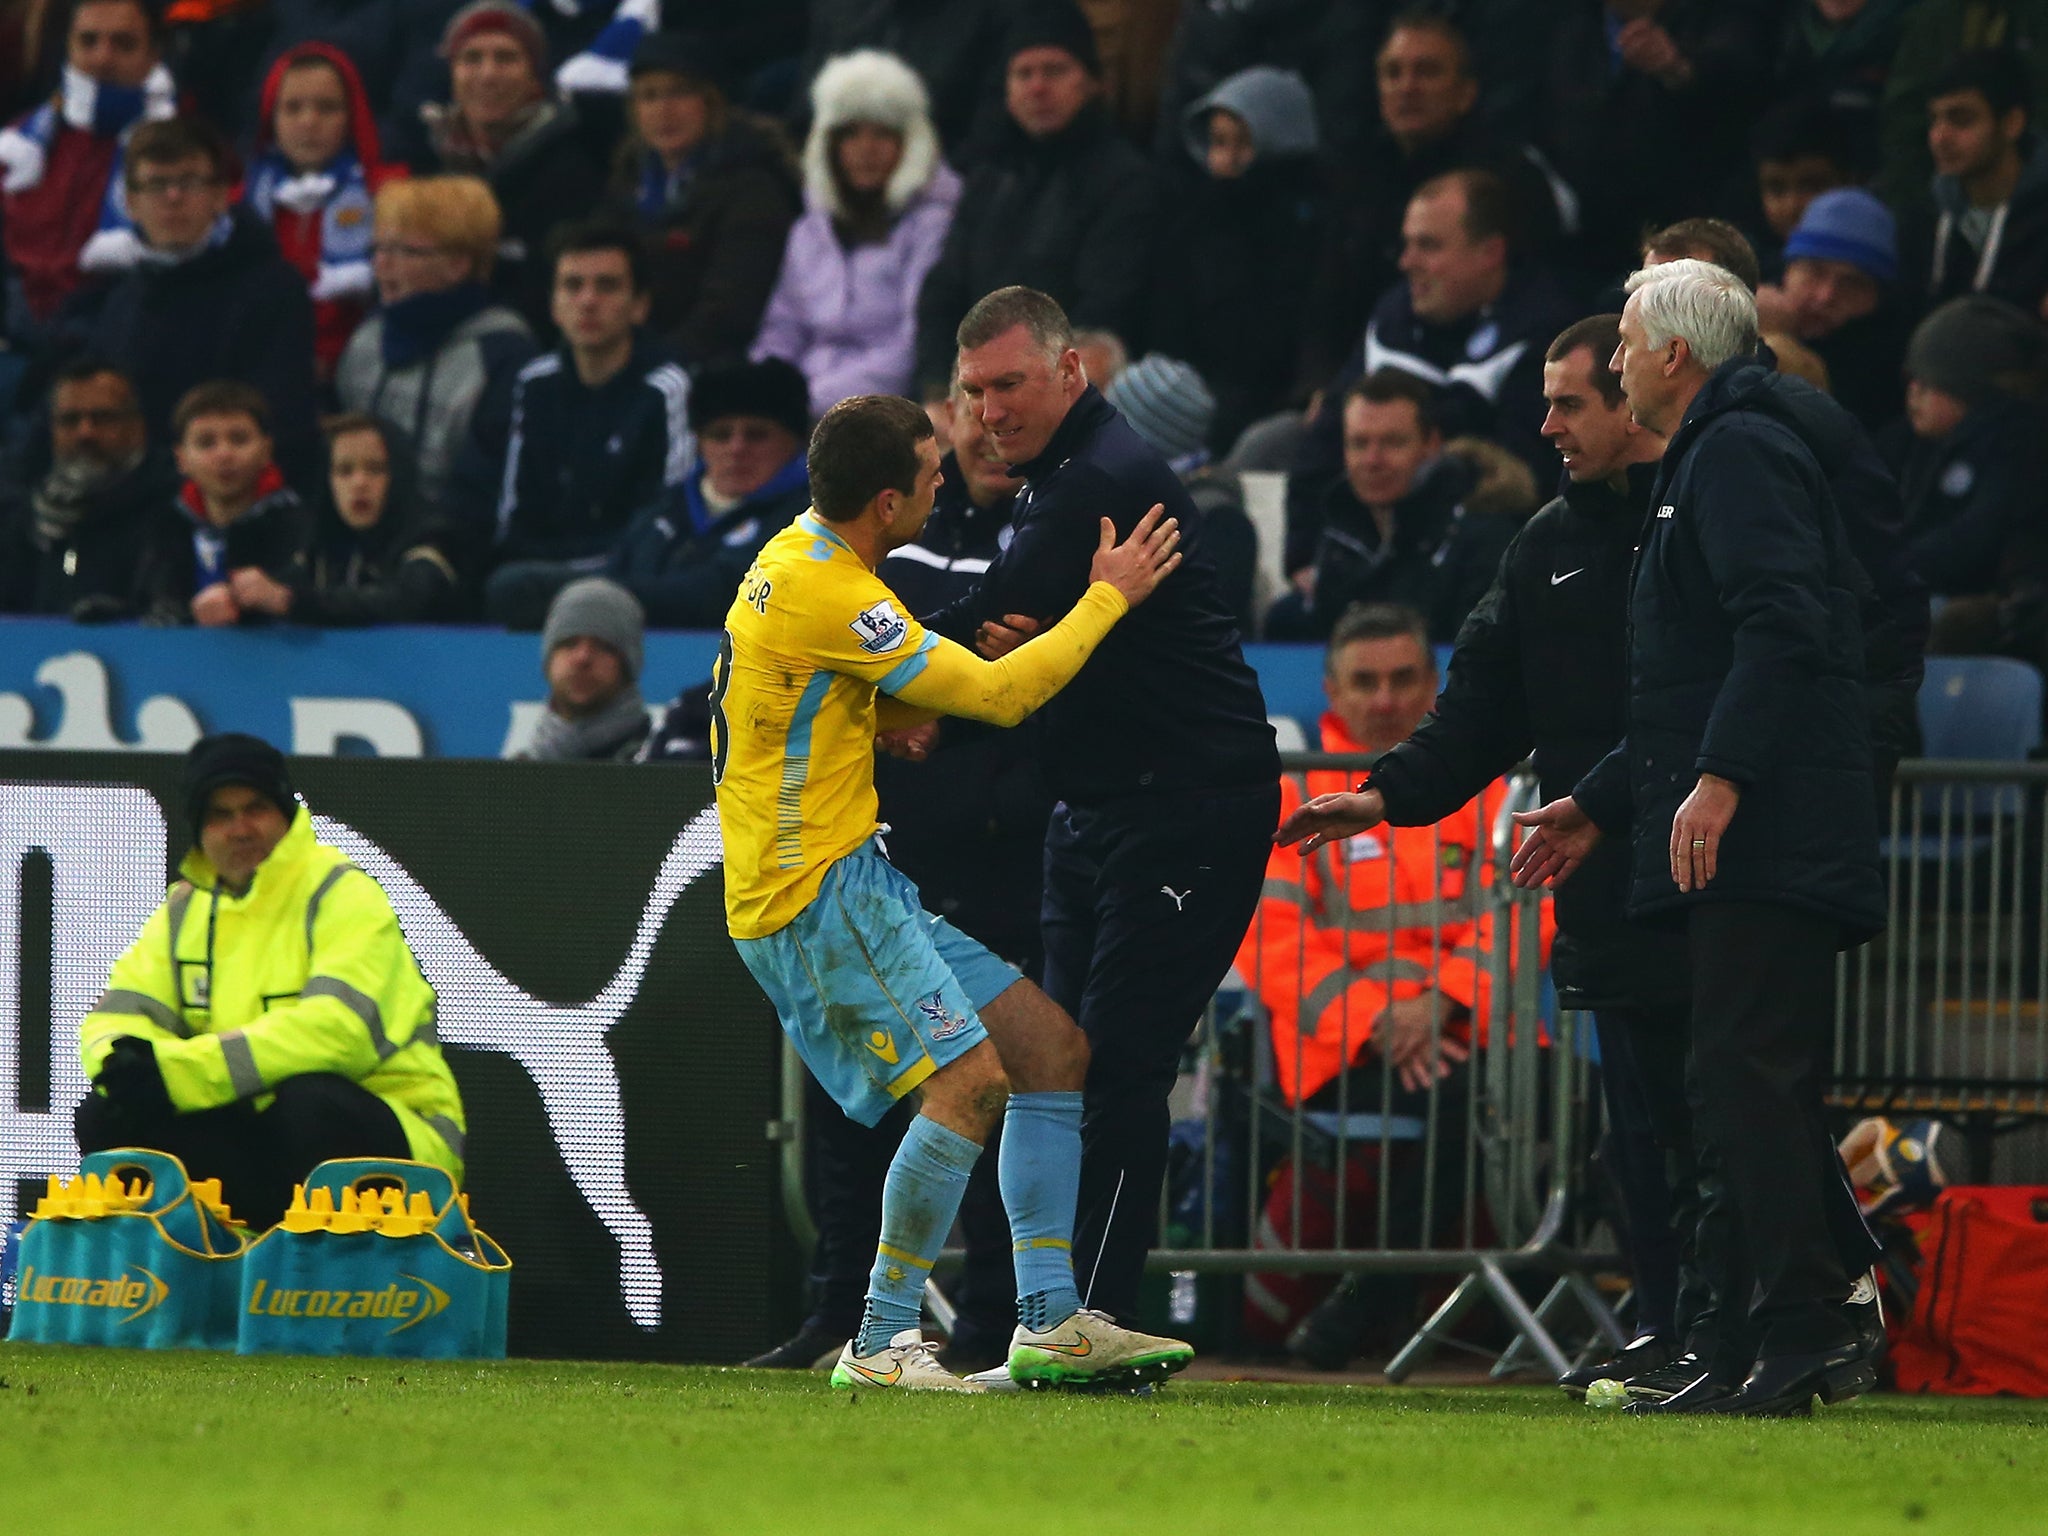 Nigel Pearson and James McArthur were involved in an altercation